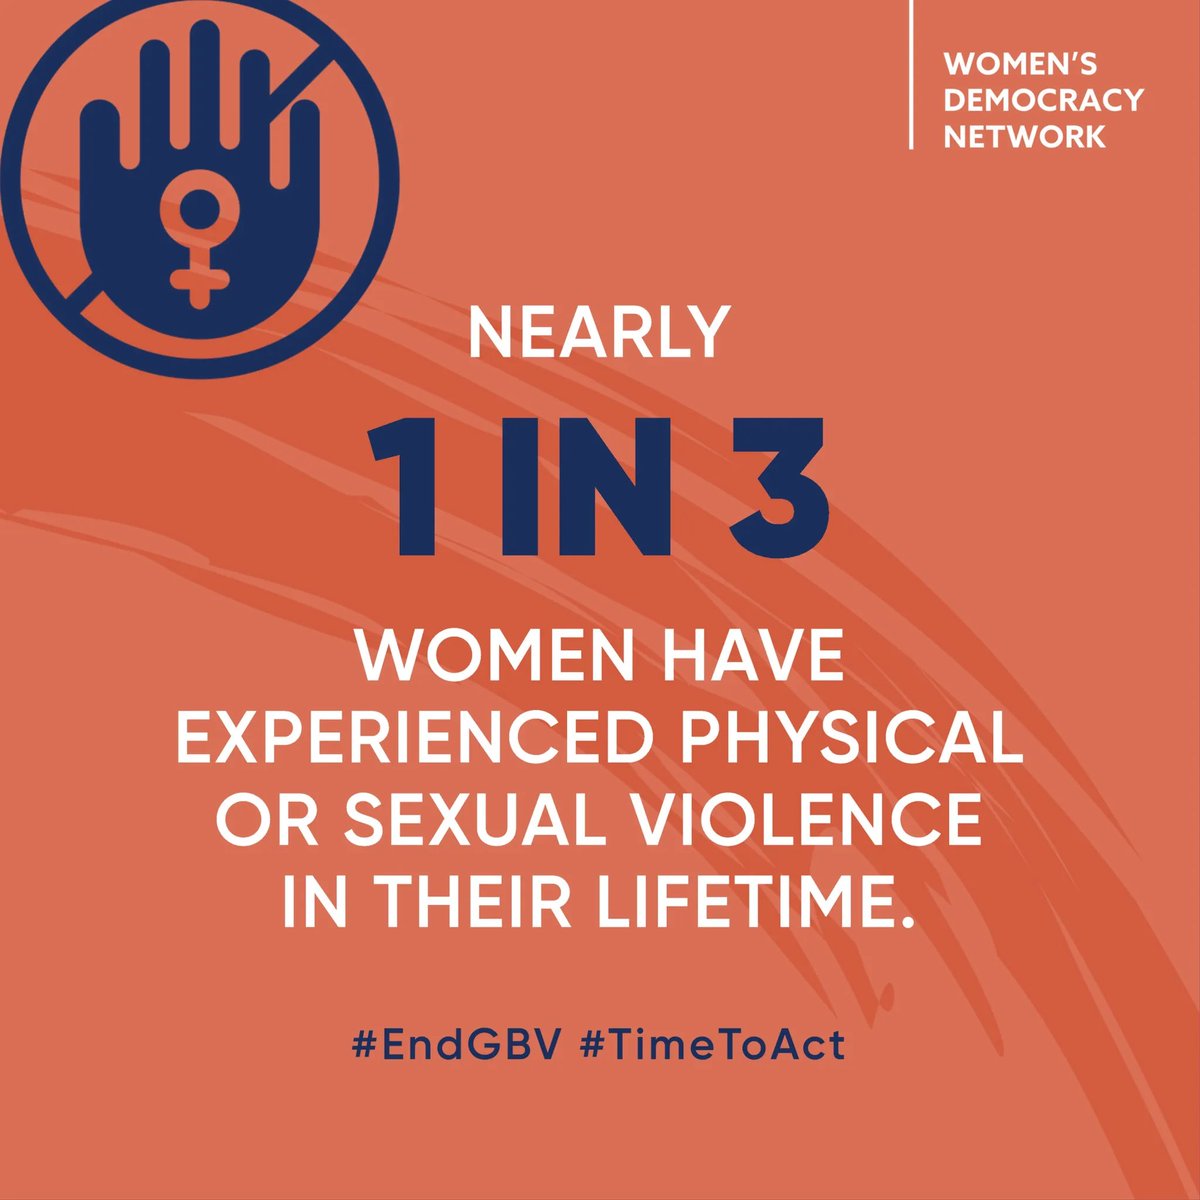 Nearly 30% of women aged 15 and older experience physical or sexual violence in their lifetimes, but less than 40% seek help of any sort according to @UNWomen. Join @WDN in its work to #EndGBV #TimetoAct @wdn @IRIglobal @IRI_Africa @WDNUganda @wdn_africa @wipfng